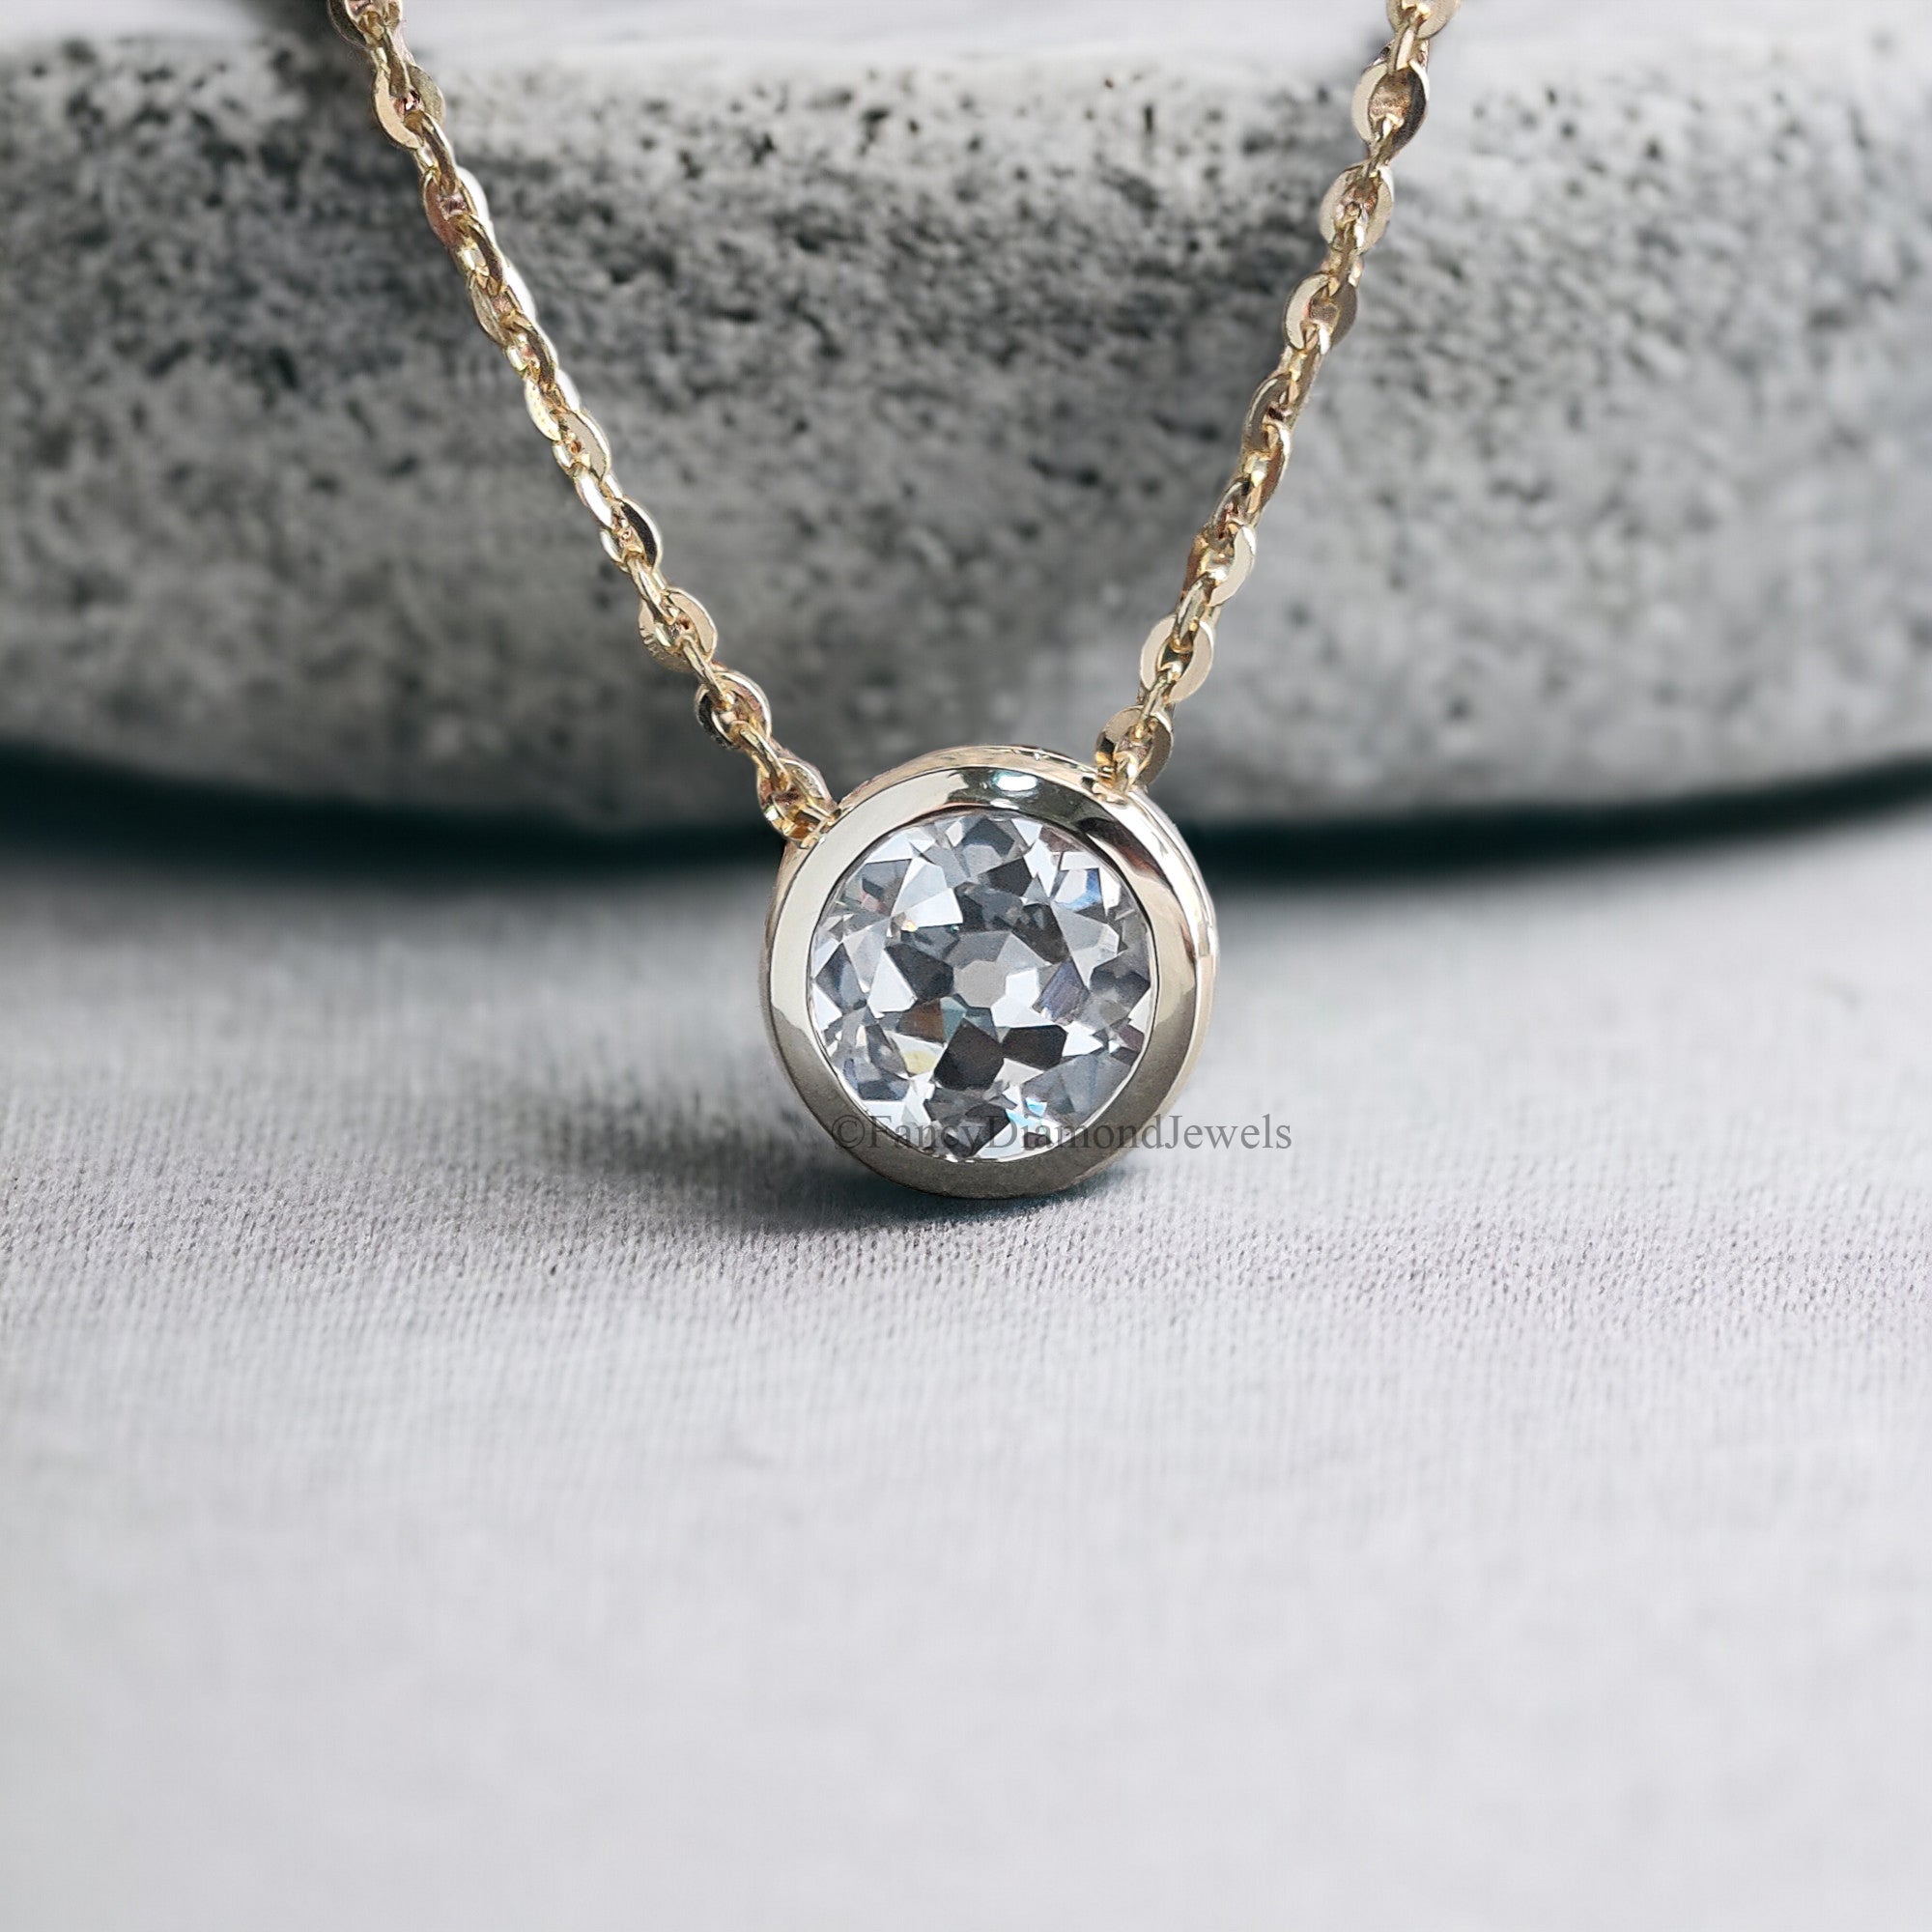 1 Carat Round Old European Cut Moissanite Lab Grown Bezel Floating Pendant Necklace With Chain 14k Yellow Gold Wedding Gift For Her FD128